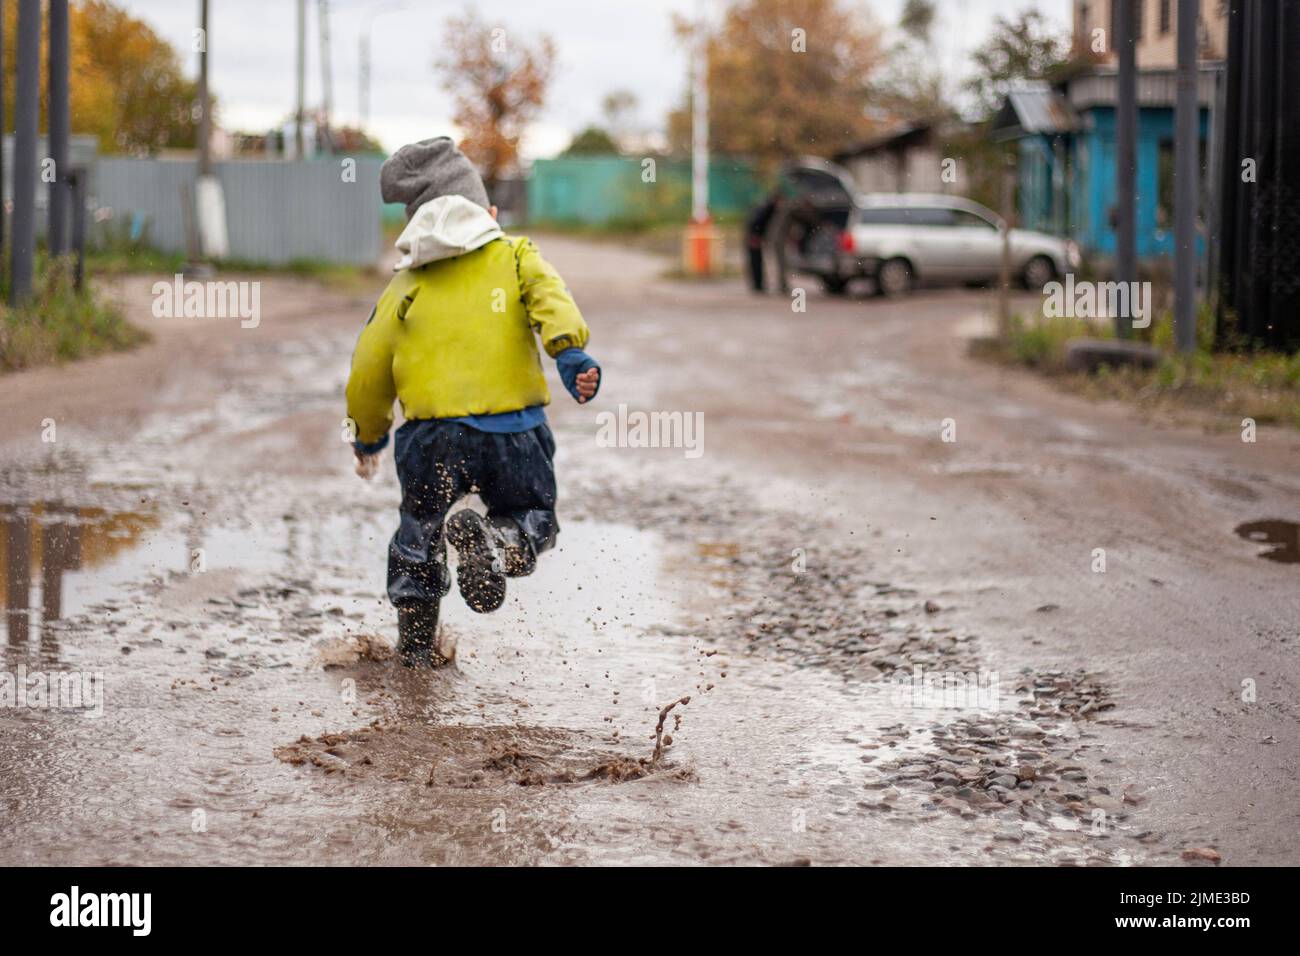 The boy runs through the puddles. Disobedient child Stock Photo